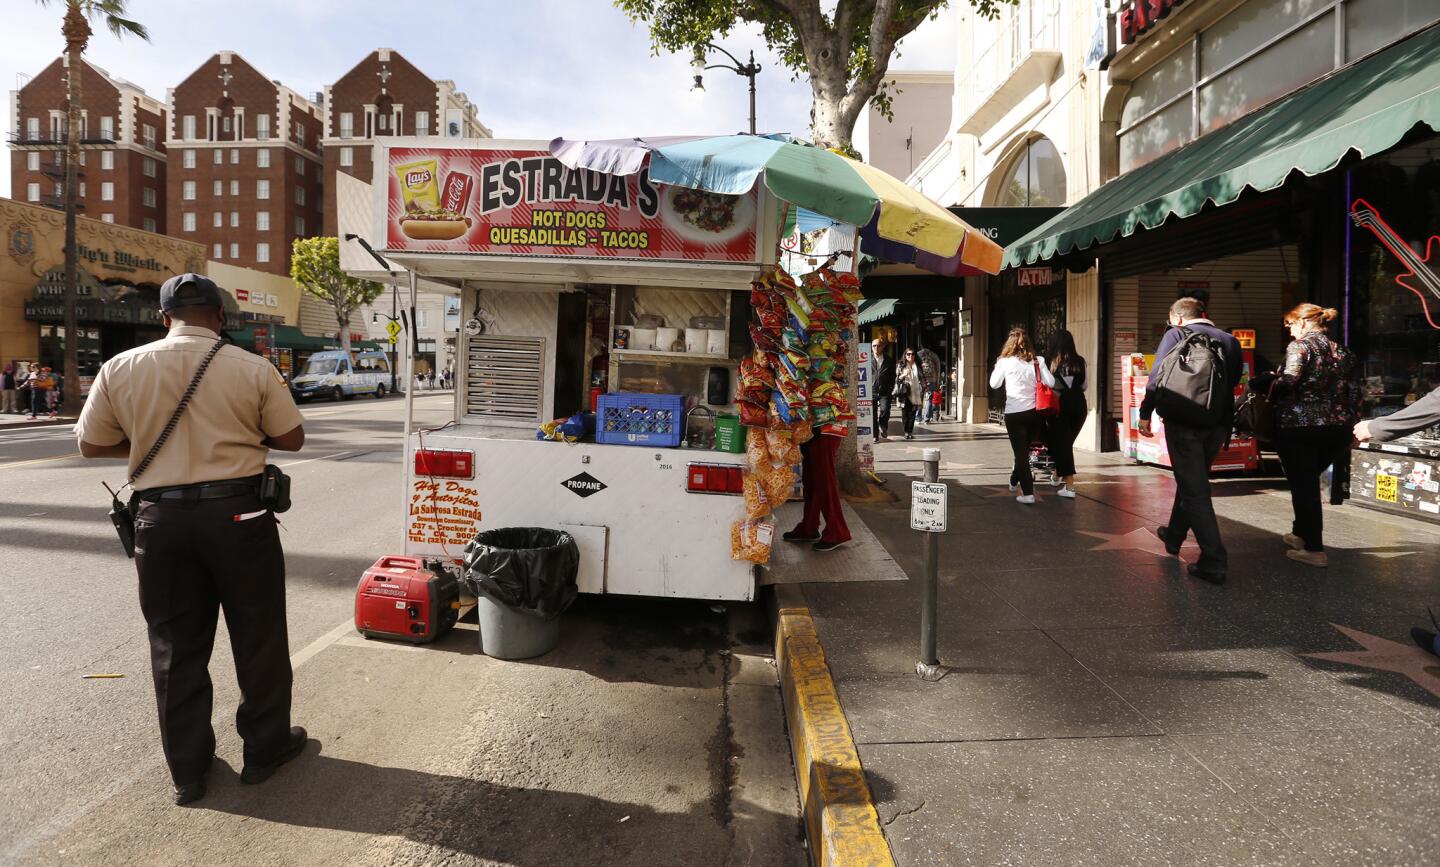 A food truck is set up outside the Hollywood Boulevard pizza shop Stefano's Two Guys From Italy.